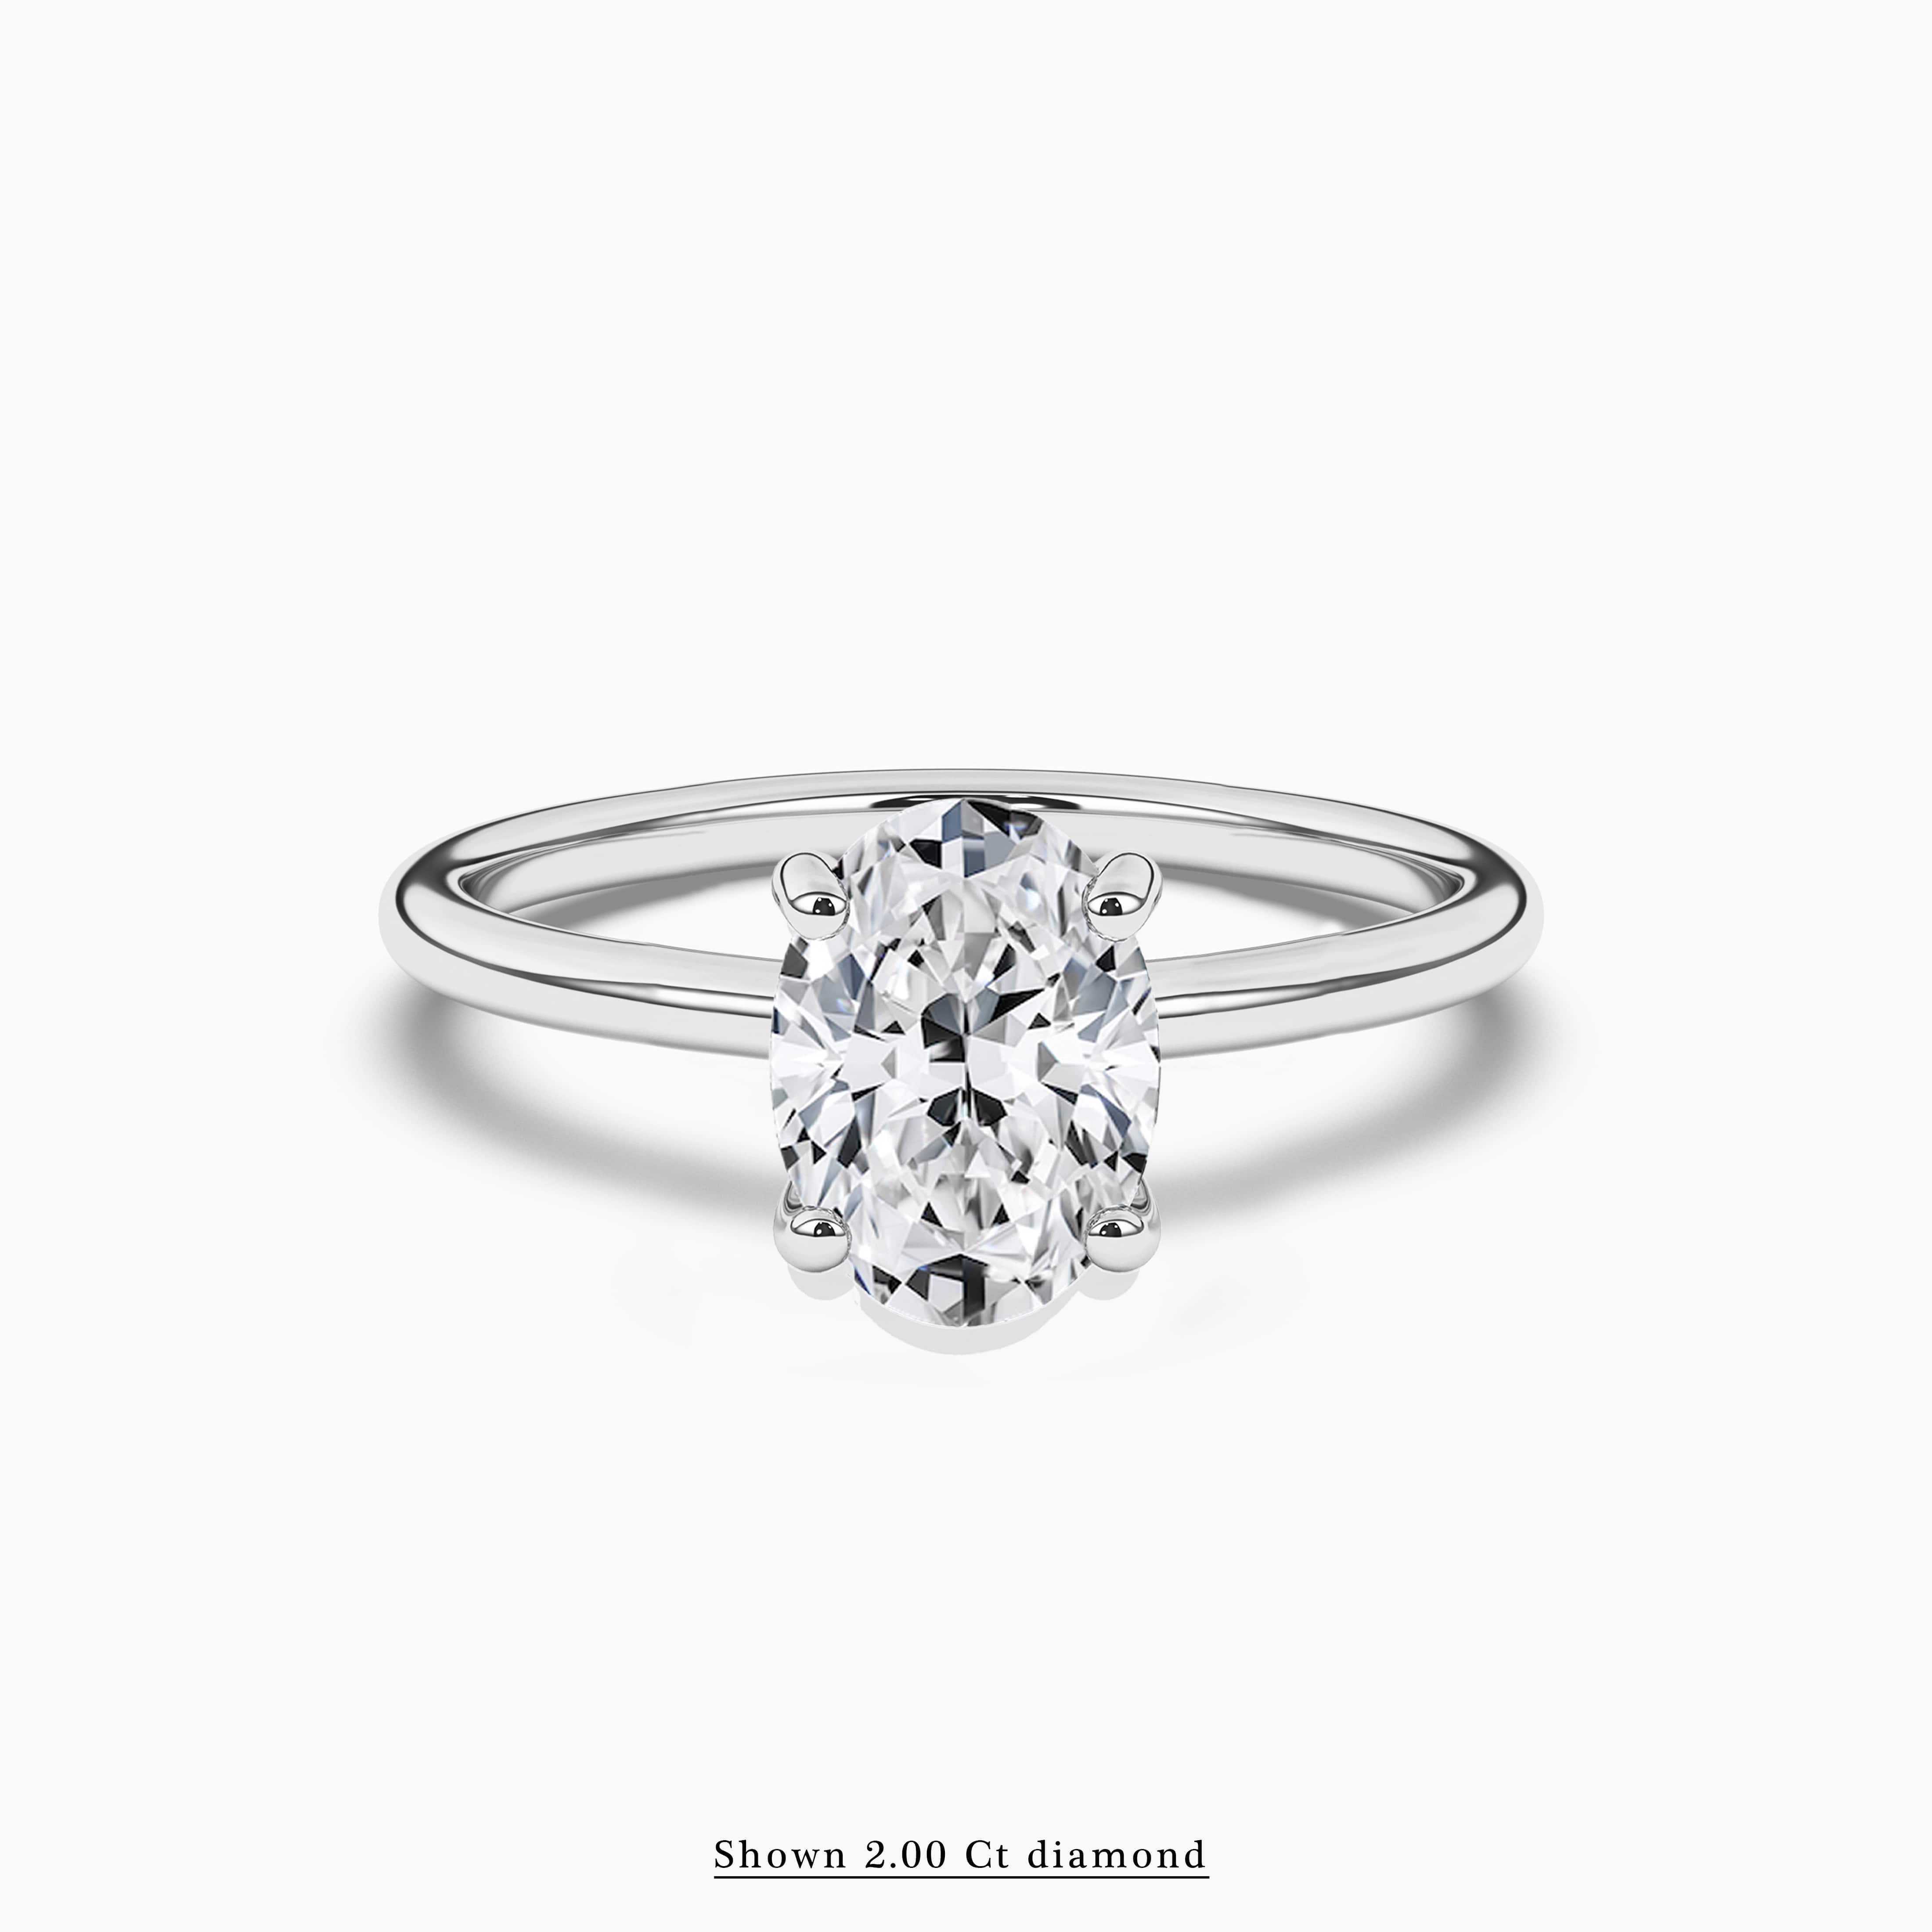 2.00 ct diamonds oval shape engagement ring in white gold